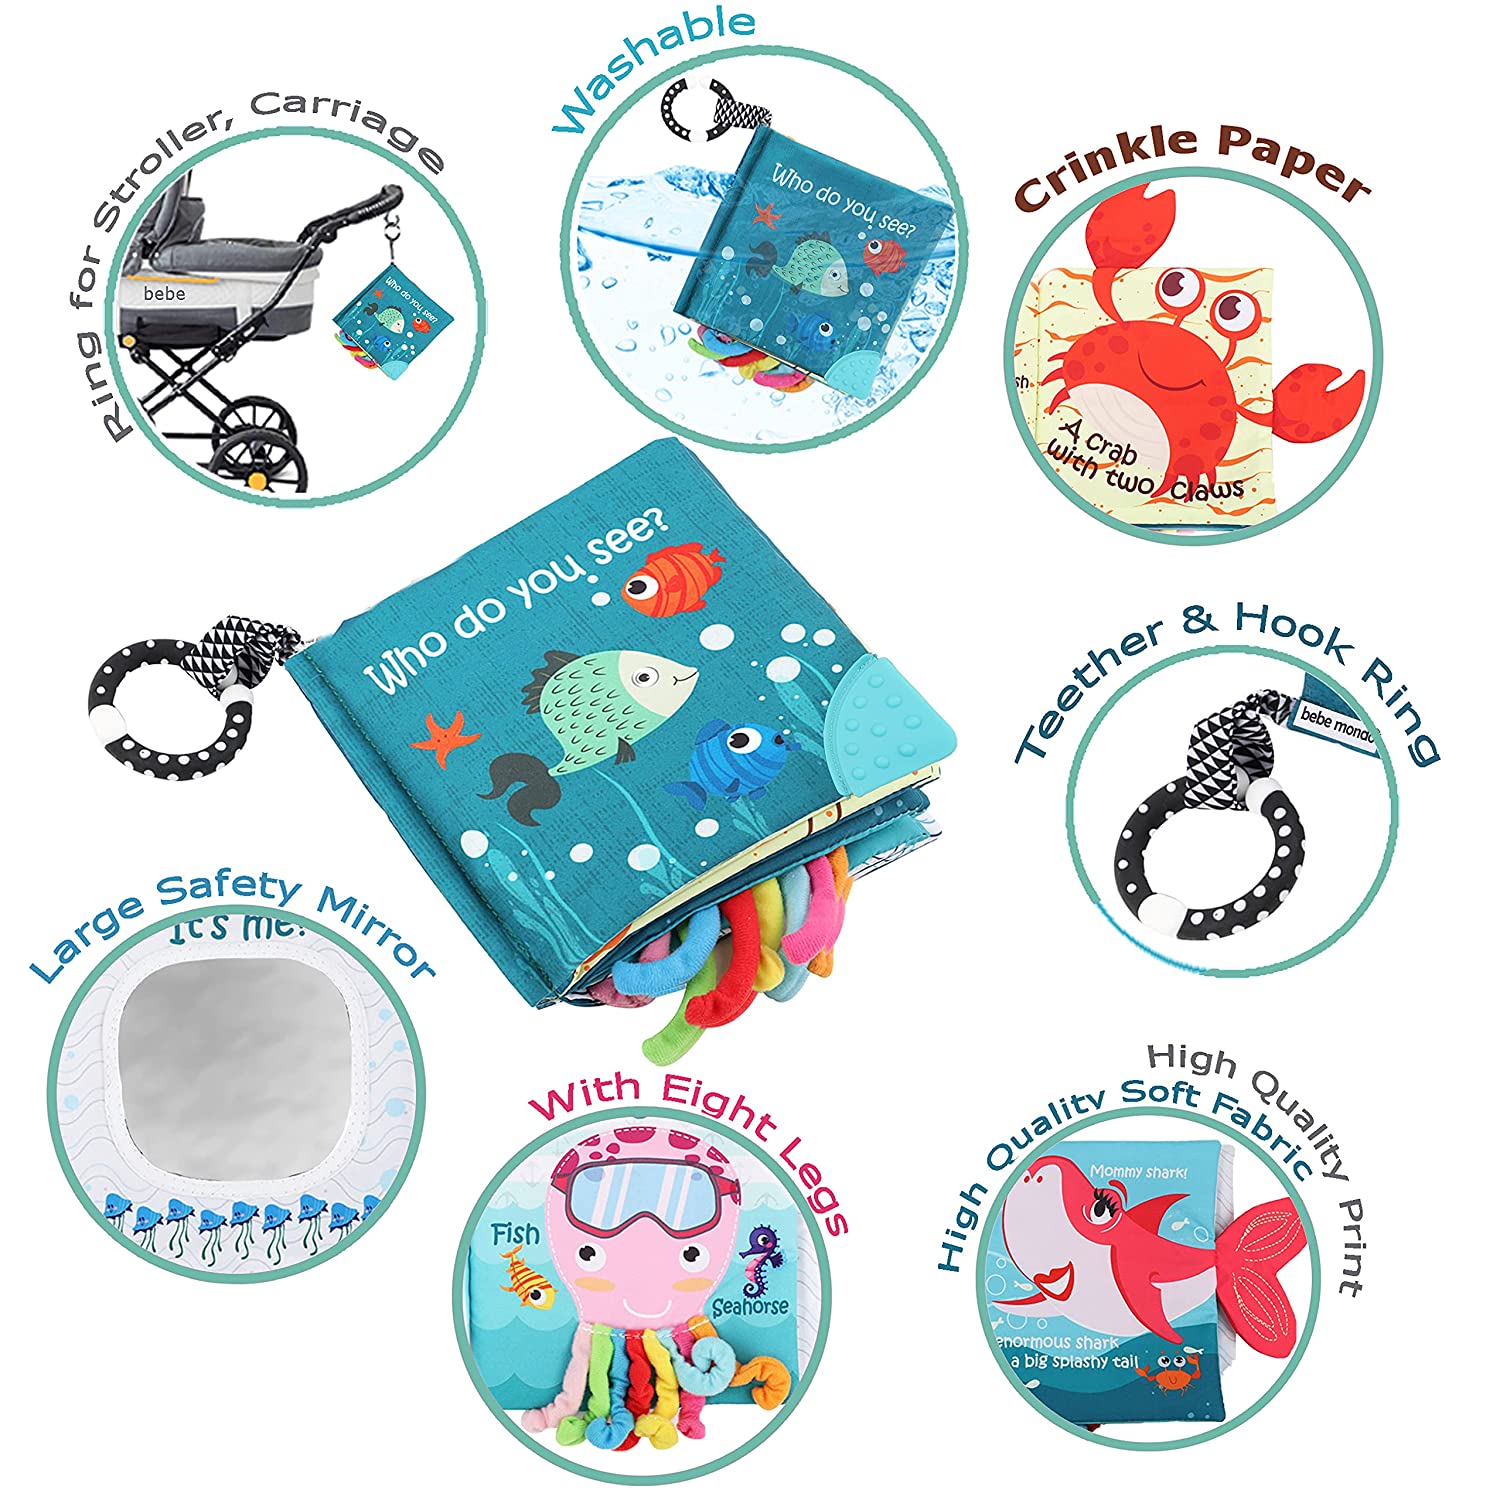 Fish Soft Cloth Book, Shark Tails Soft Activity Crinkle Baby Books Toys for Early Education for Babies,Toddlers,Infants,Kids, Teether Ring,Teething Baby Book Baby Shark,Octopus, Ocean Sea Animal Books